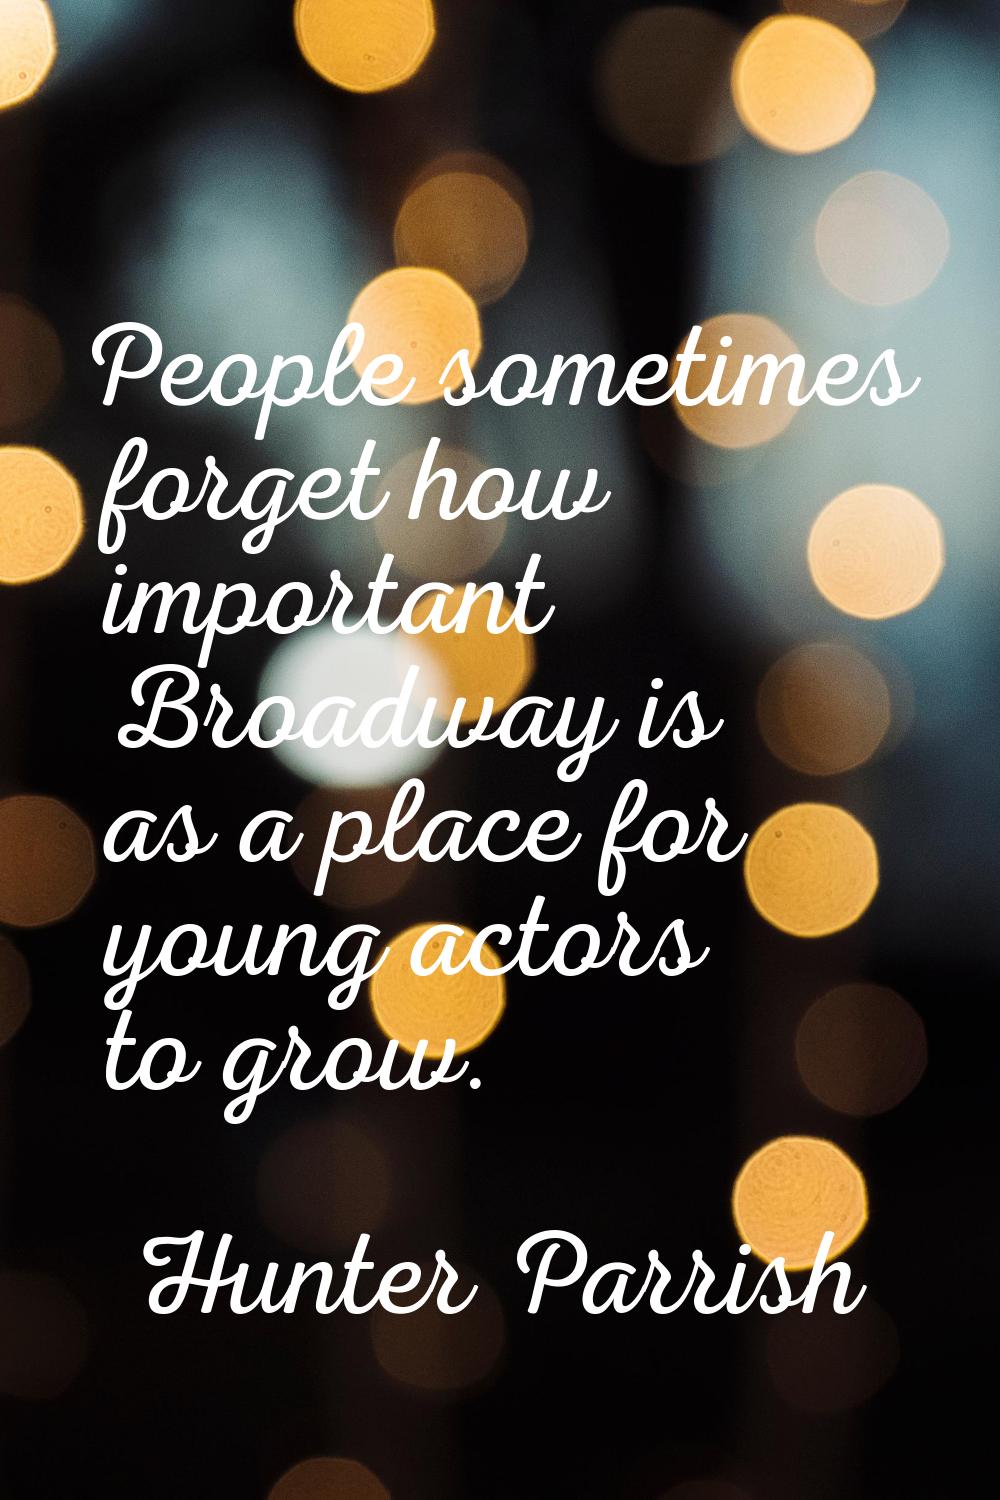 People sometimes forget how important Broadway is as a place for young actors to grow.